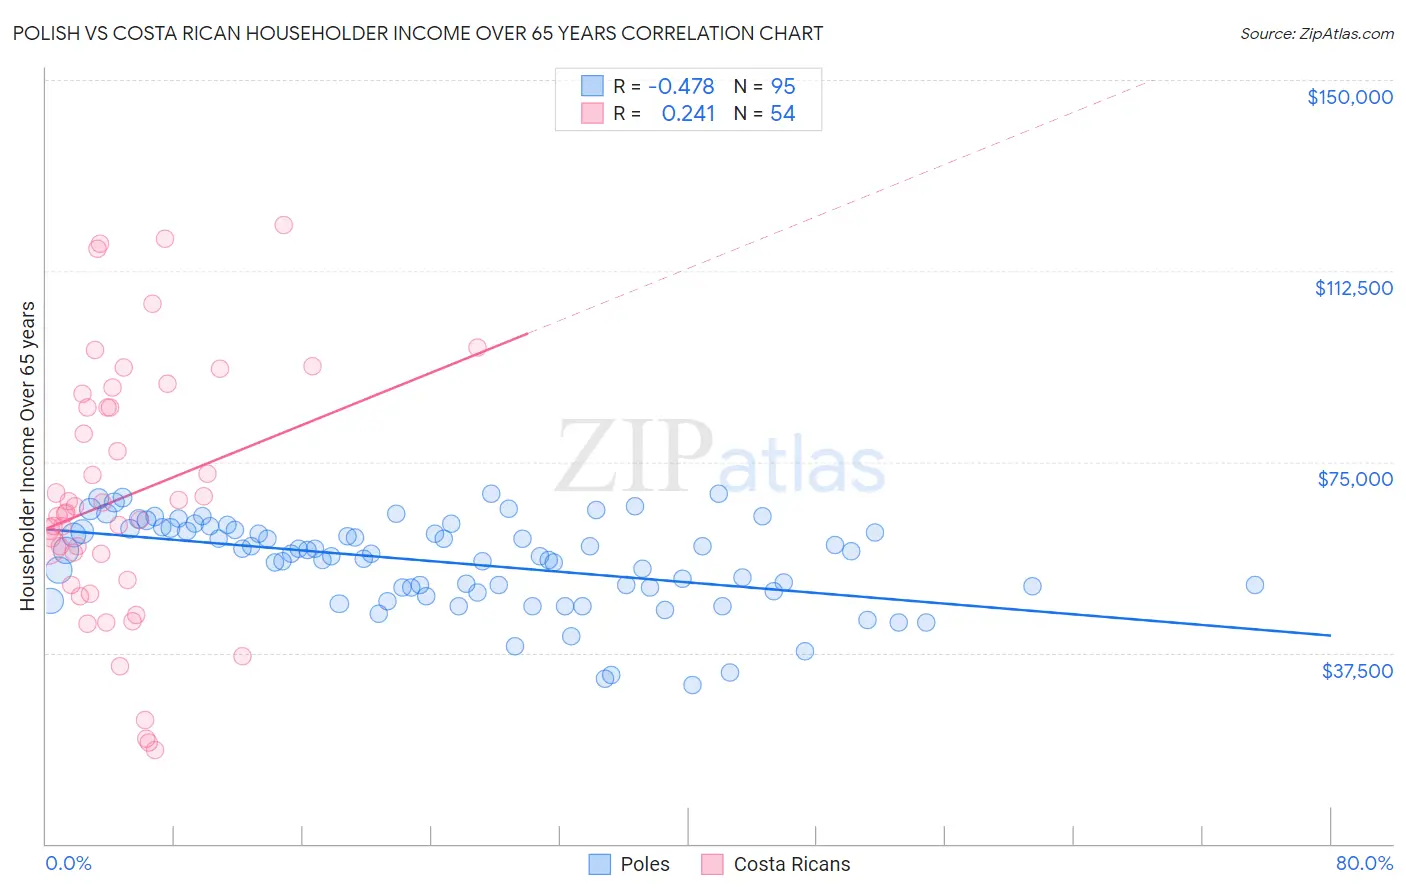 Polish vs Costa Rican Householder Income Over 65 years